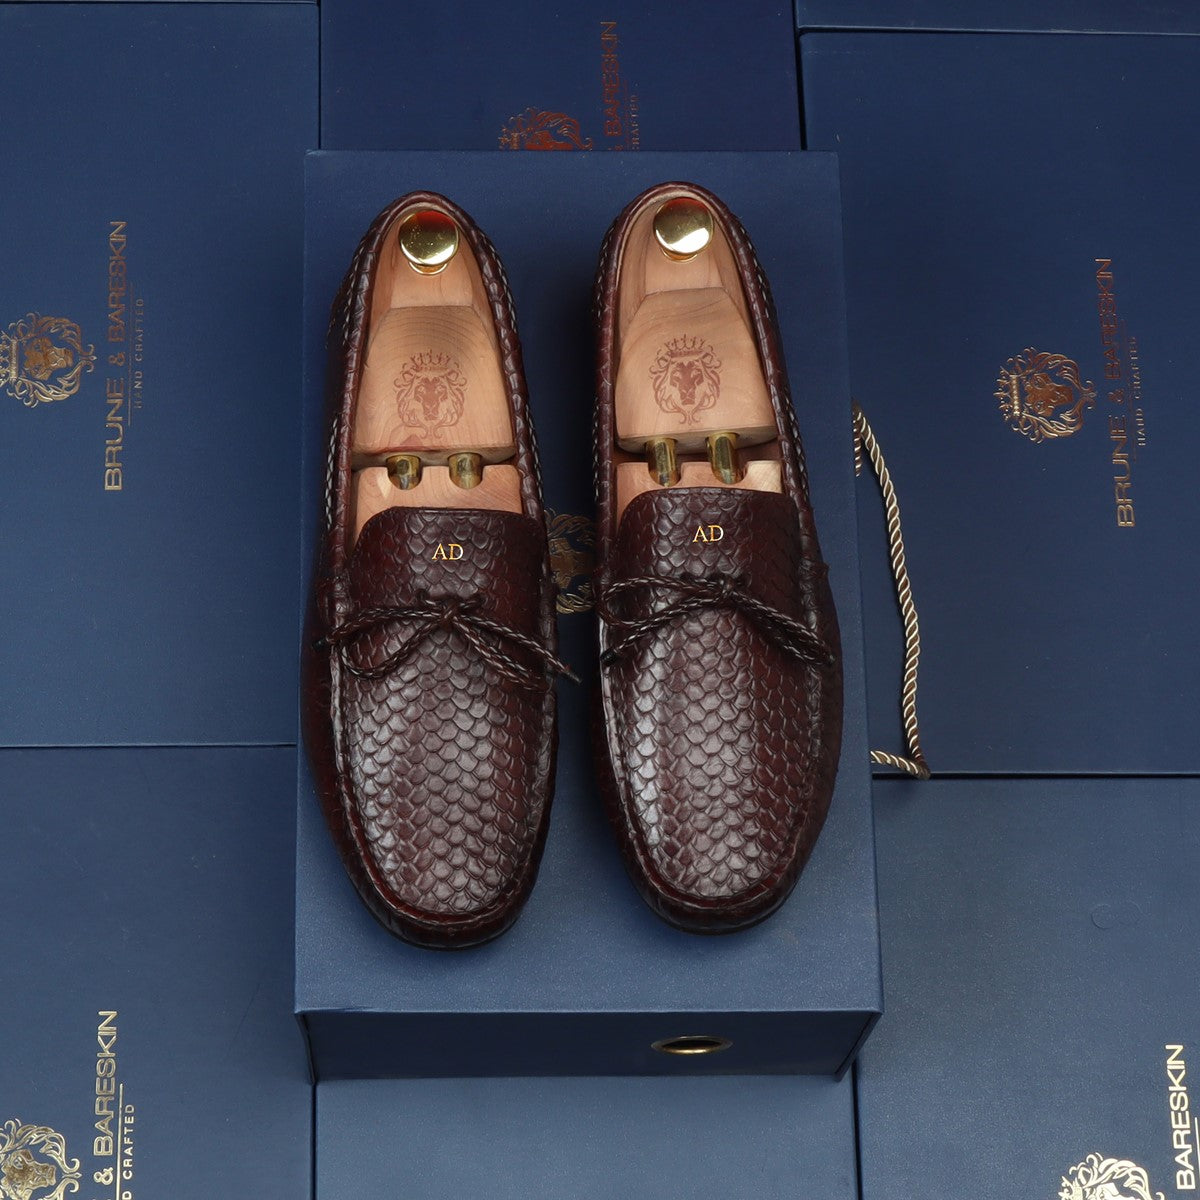 Bespoke Brown Loafers Snake Scales Textured Leather Weaved Tassel Bow With Hand-painted Initials by Brune & Bareskin